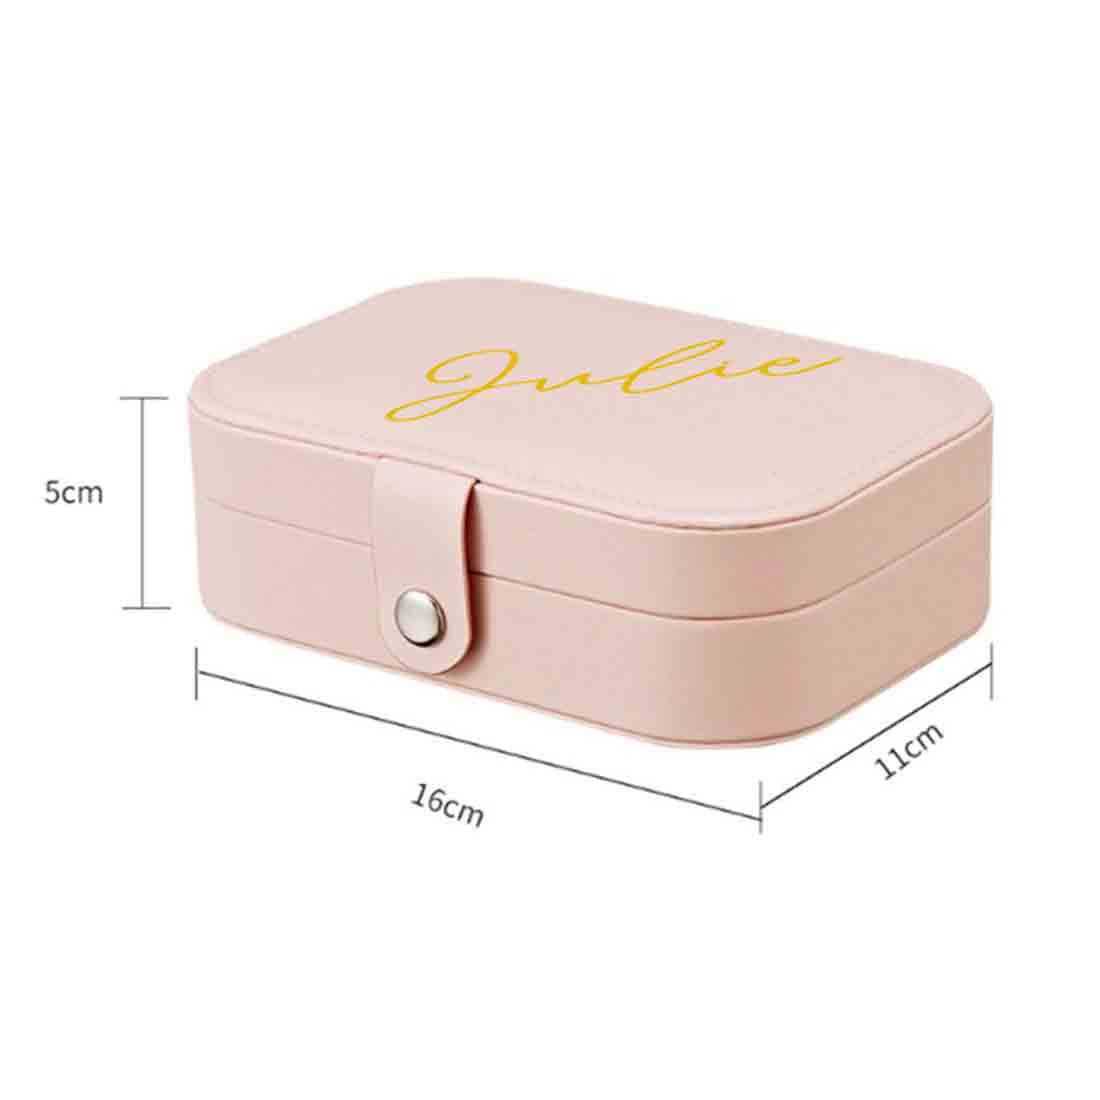 Jewellery Box Customized for Travel Storage Case for Rings Earrings and Pendants